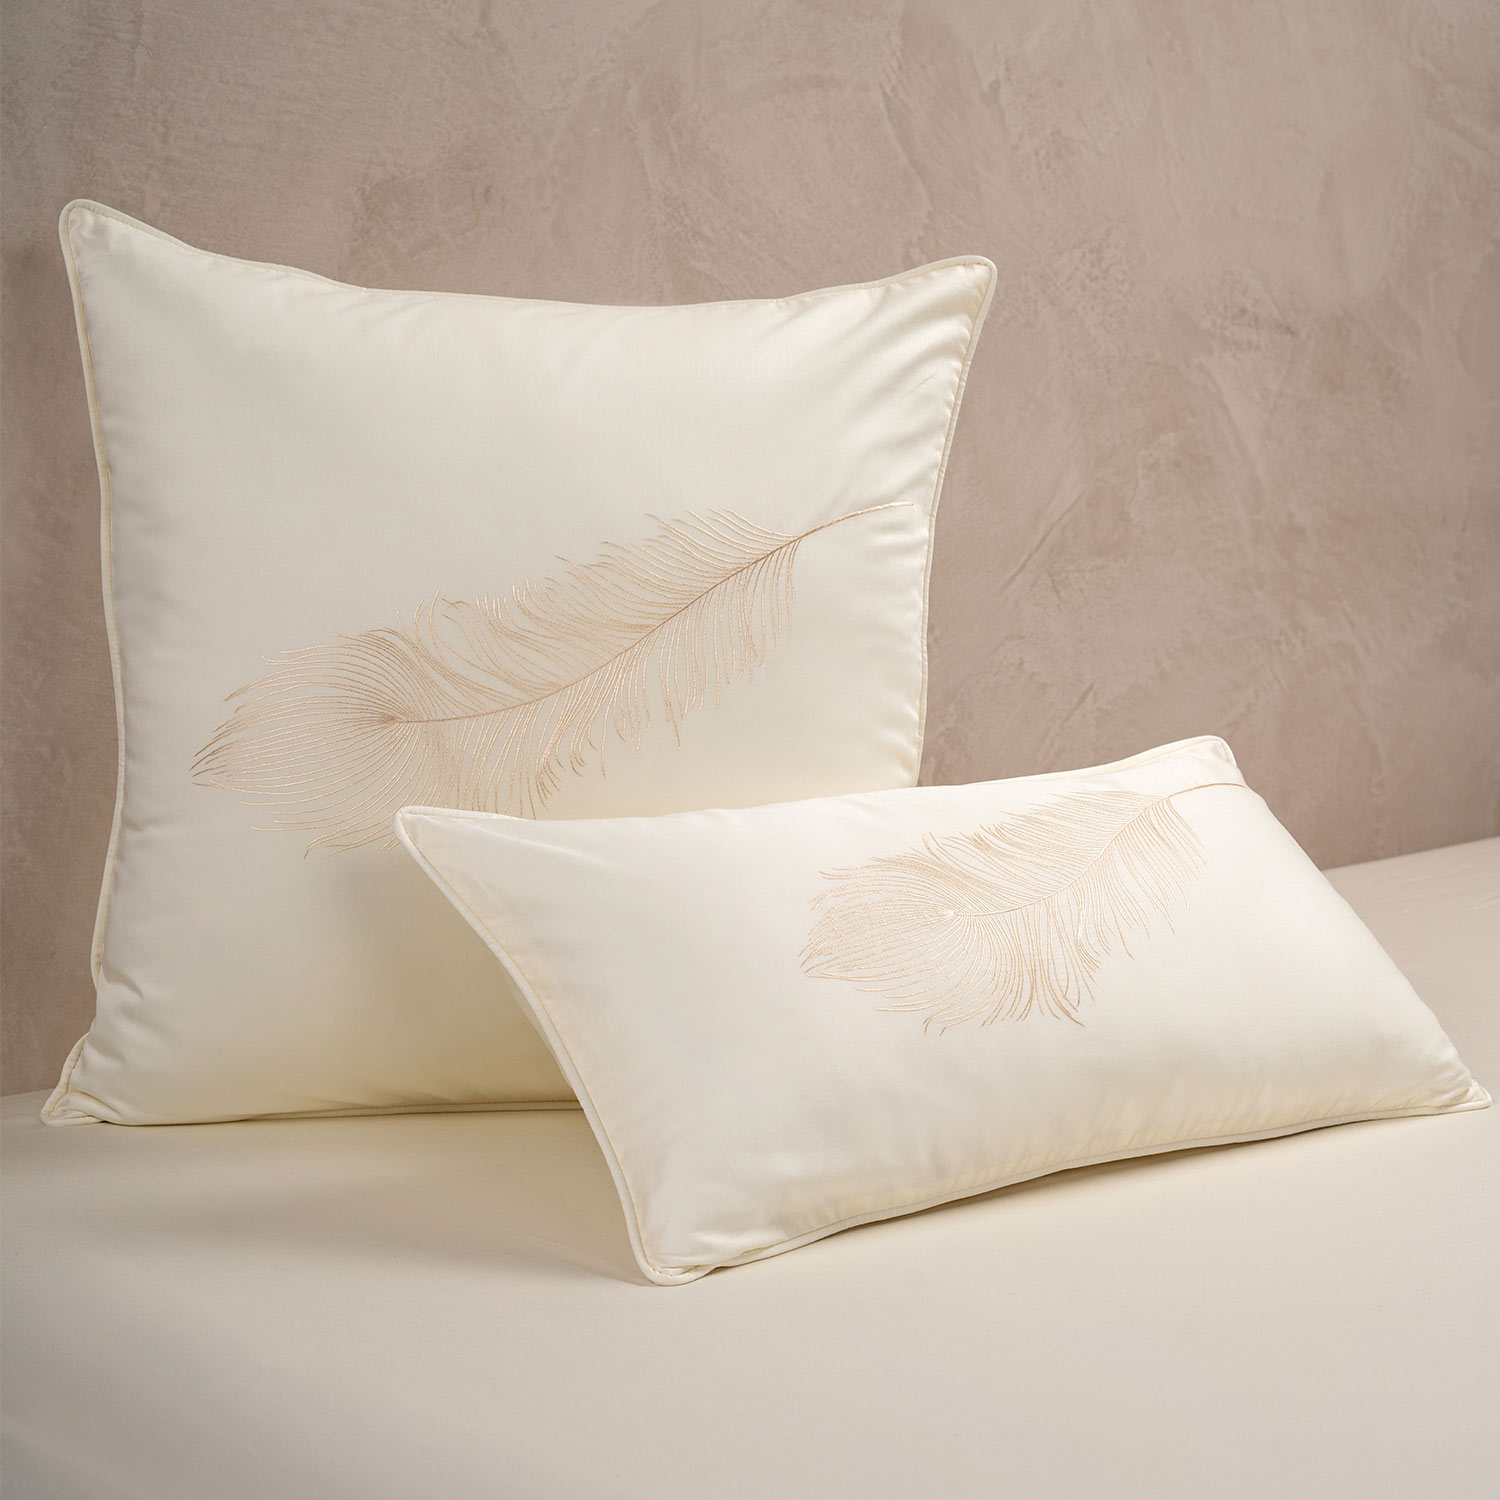 Feather Cushion Cover | Sale